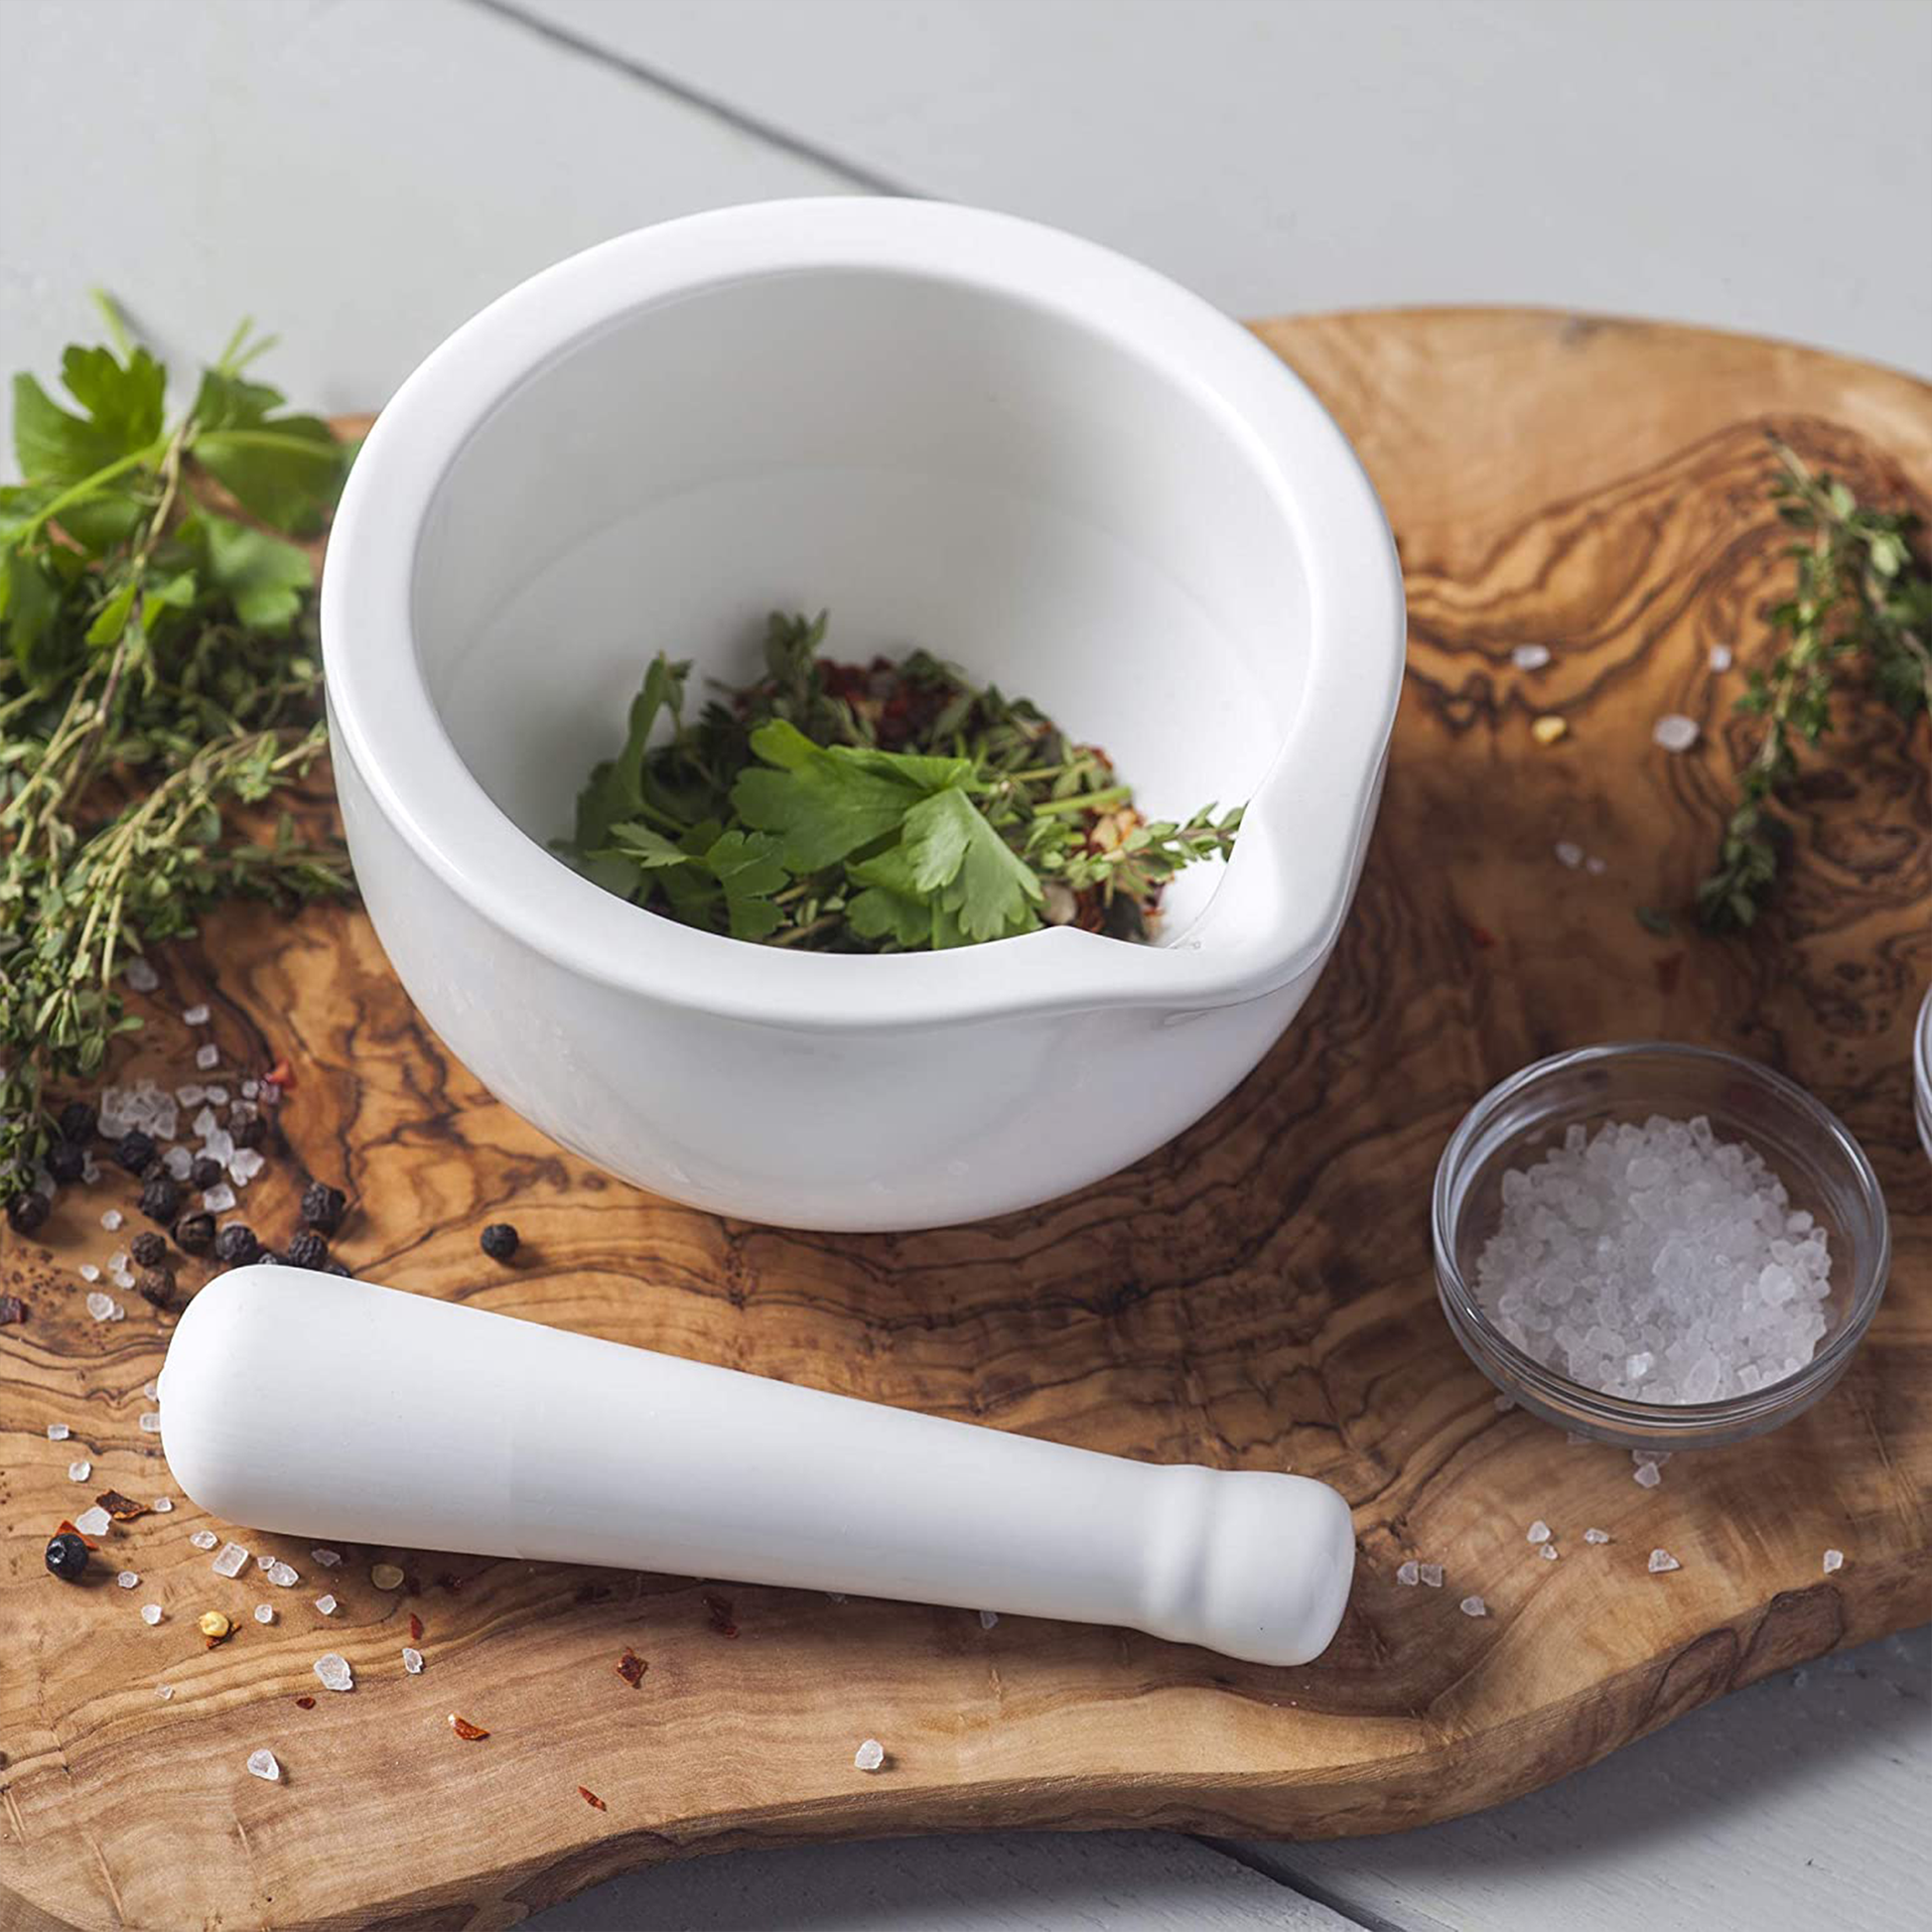 the mortar and pestle on a serving board filled with fresh herbs